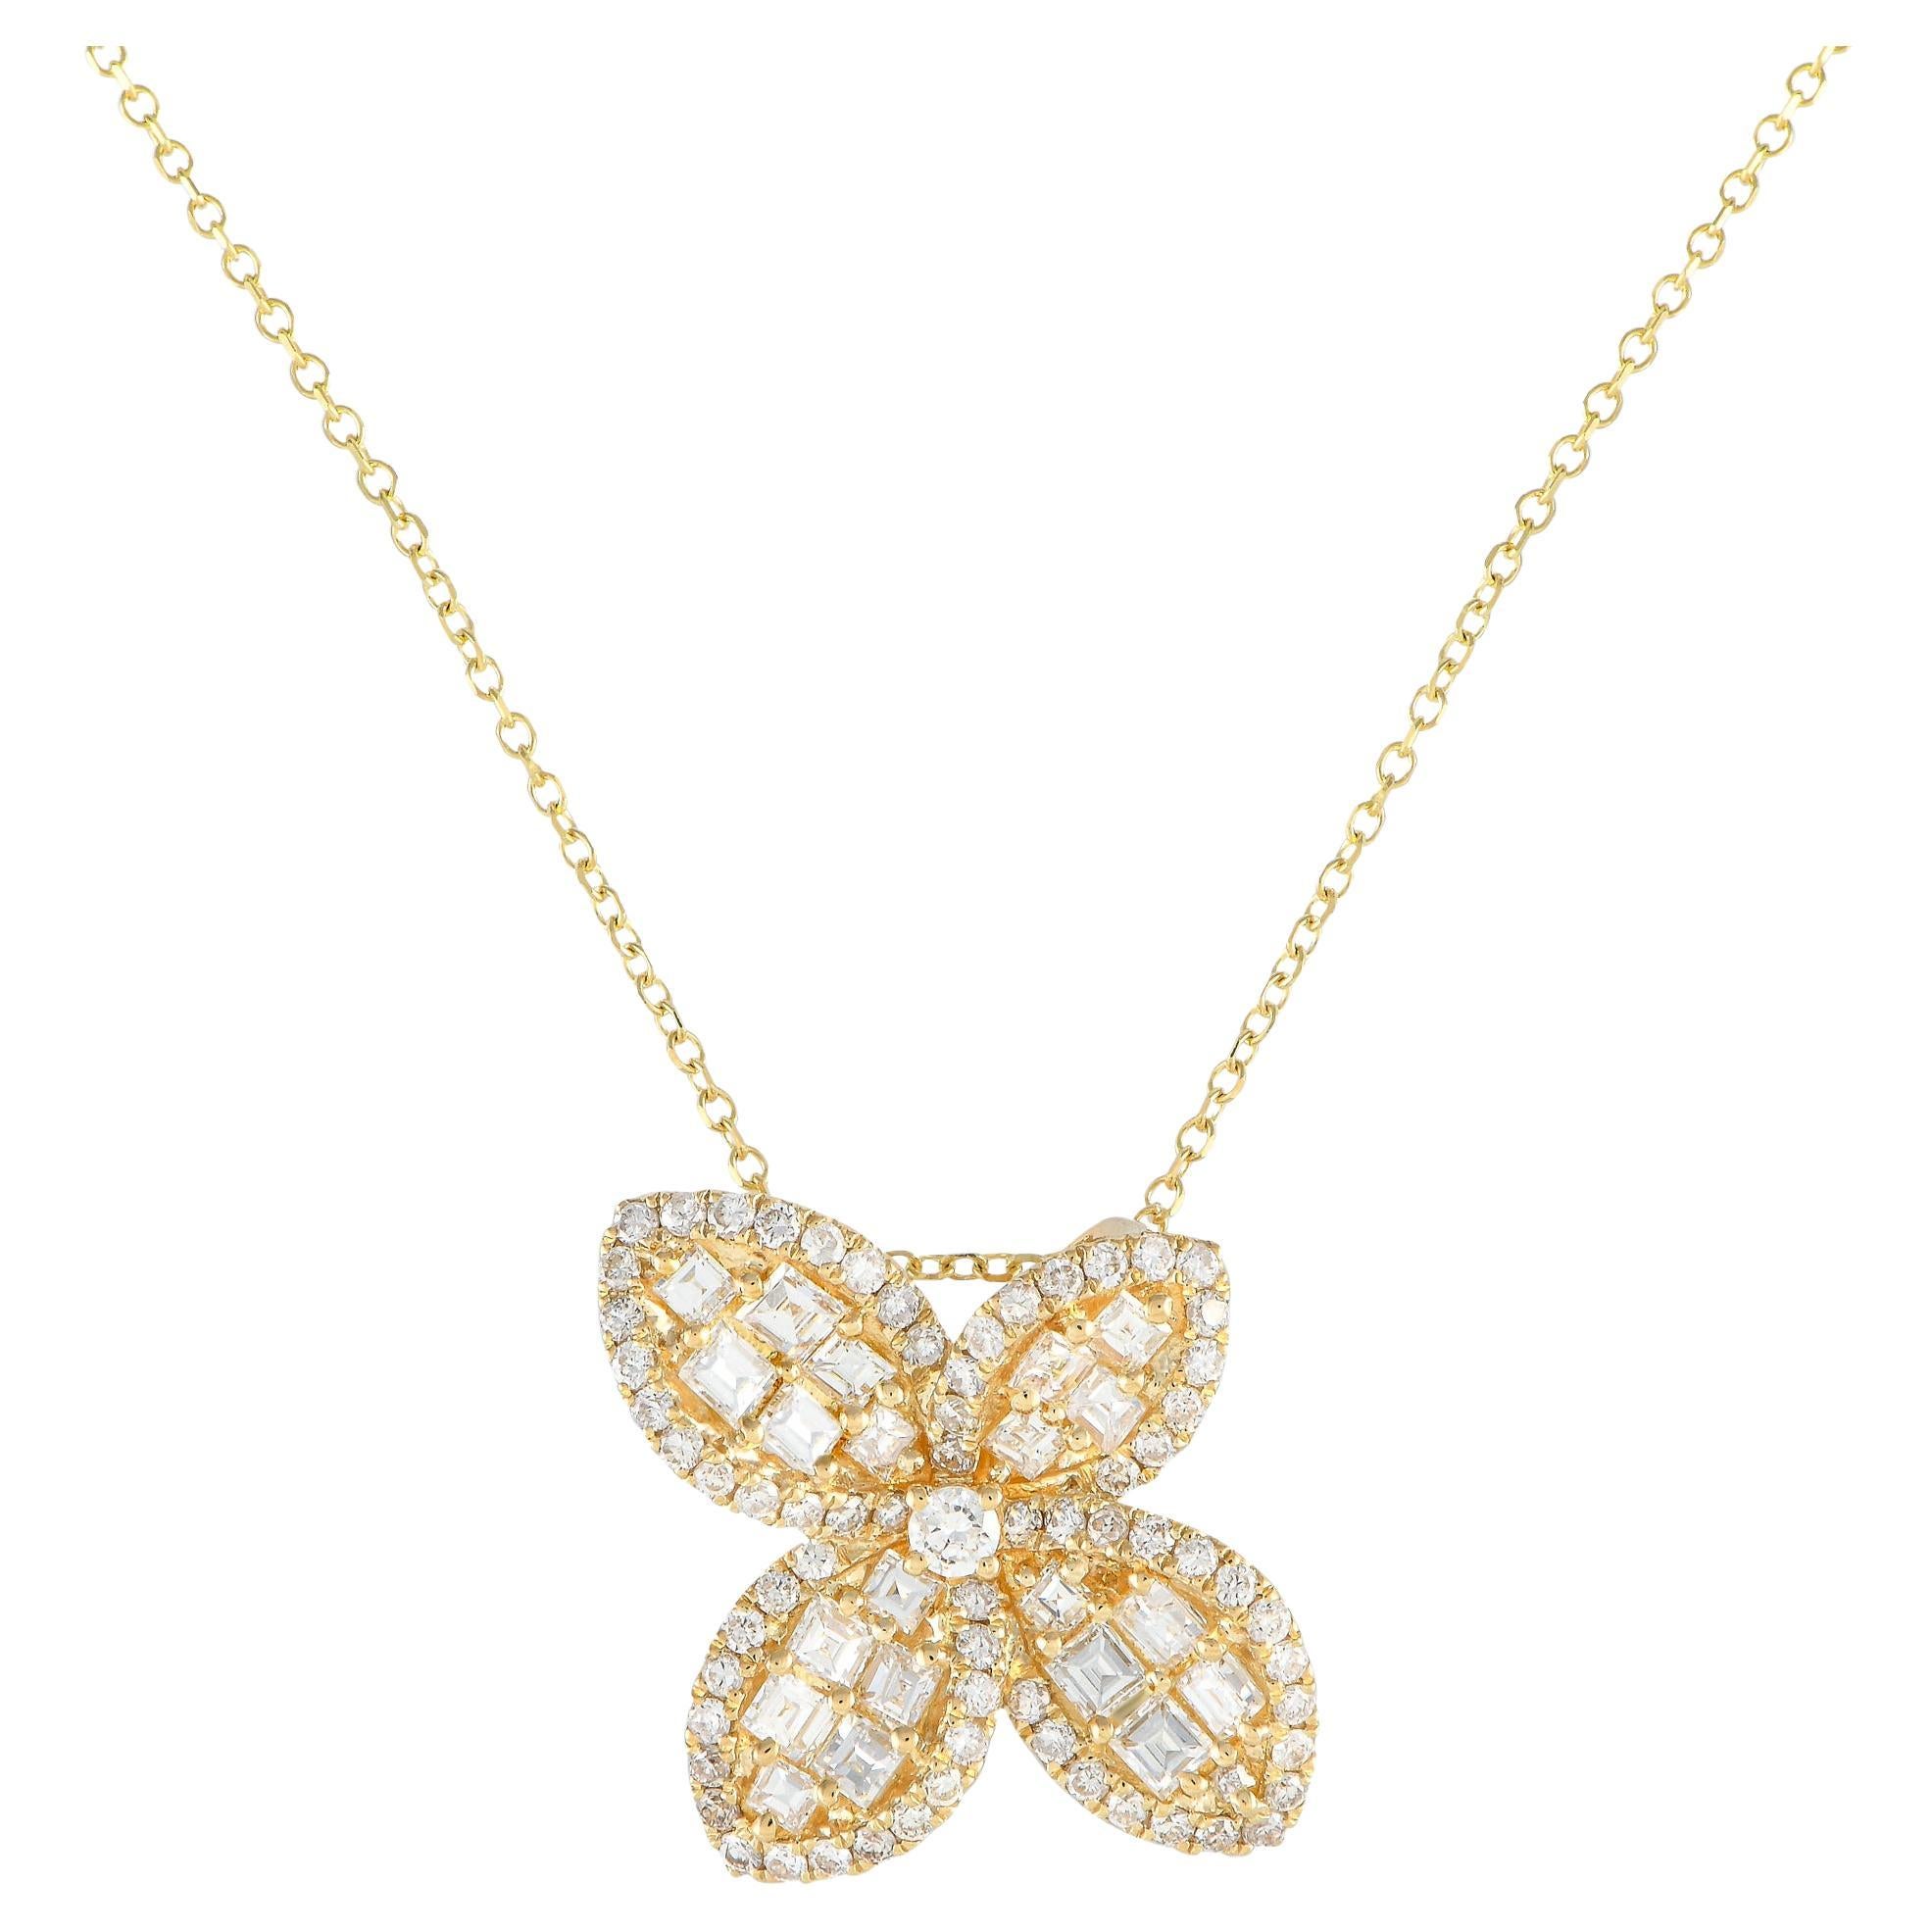 LB Exclusive 18K Yellow Gold 1.10ct Diamond Necklace